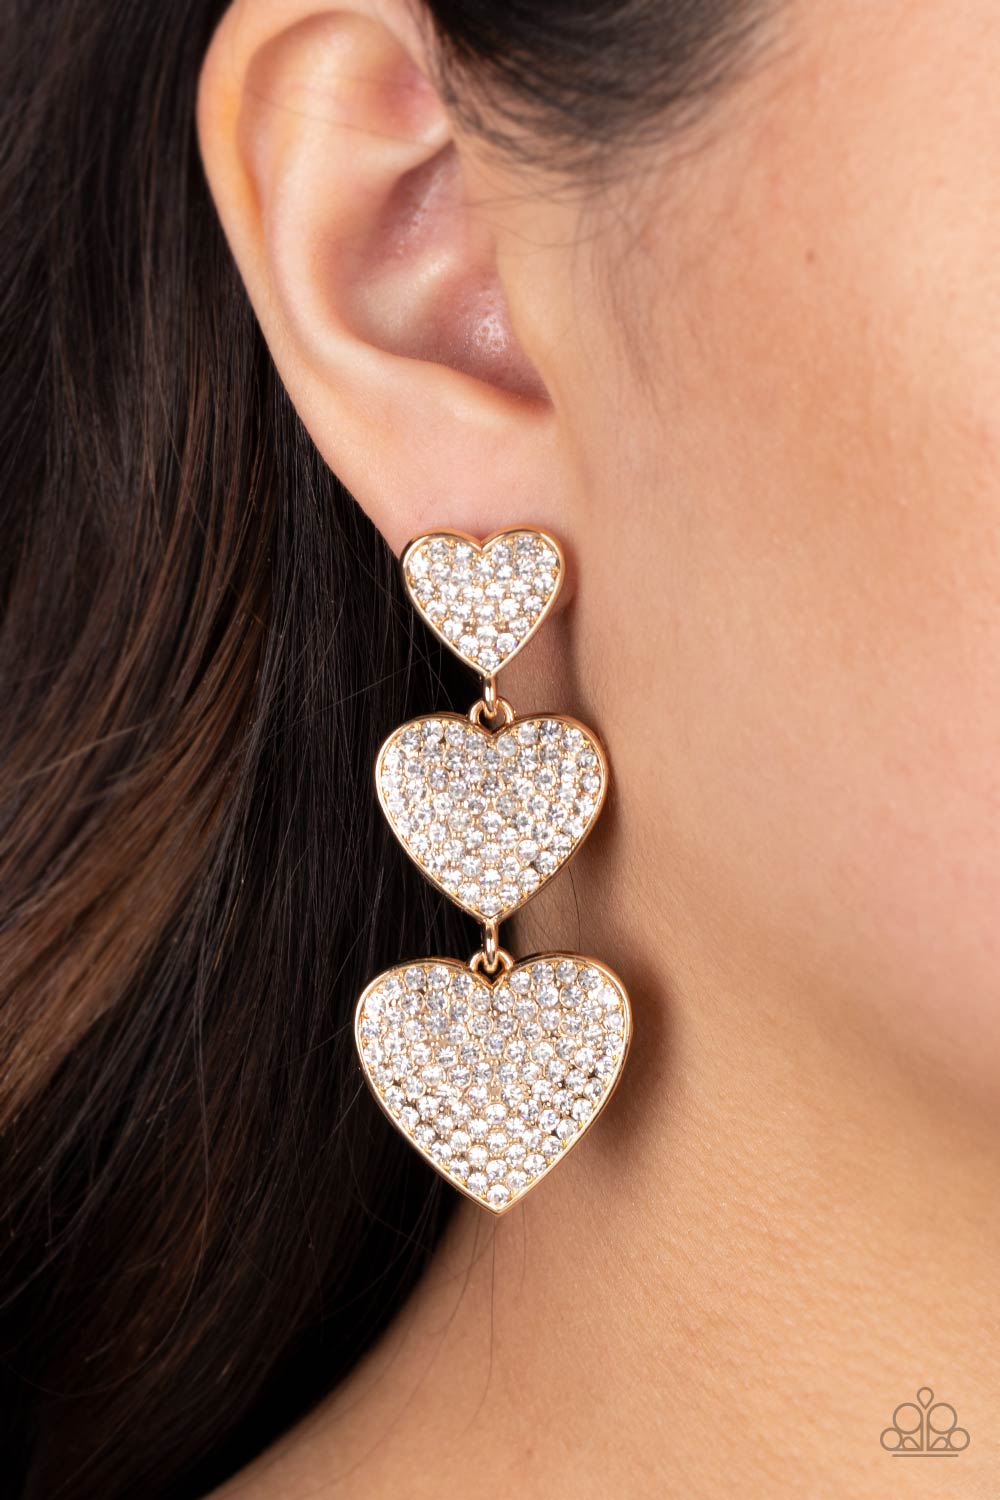 Couples Retreat Gold &amp; White Rhinestone Heart Earrings - Paparazzi Accessories-on model - CarasShop.com - $5 Jewelry by Cara Jewels